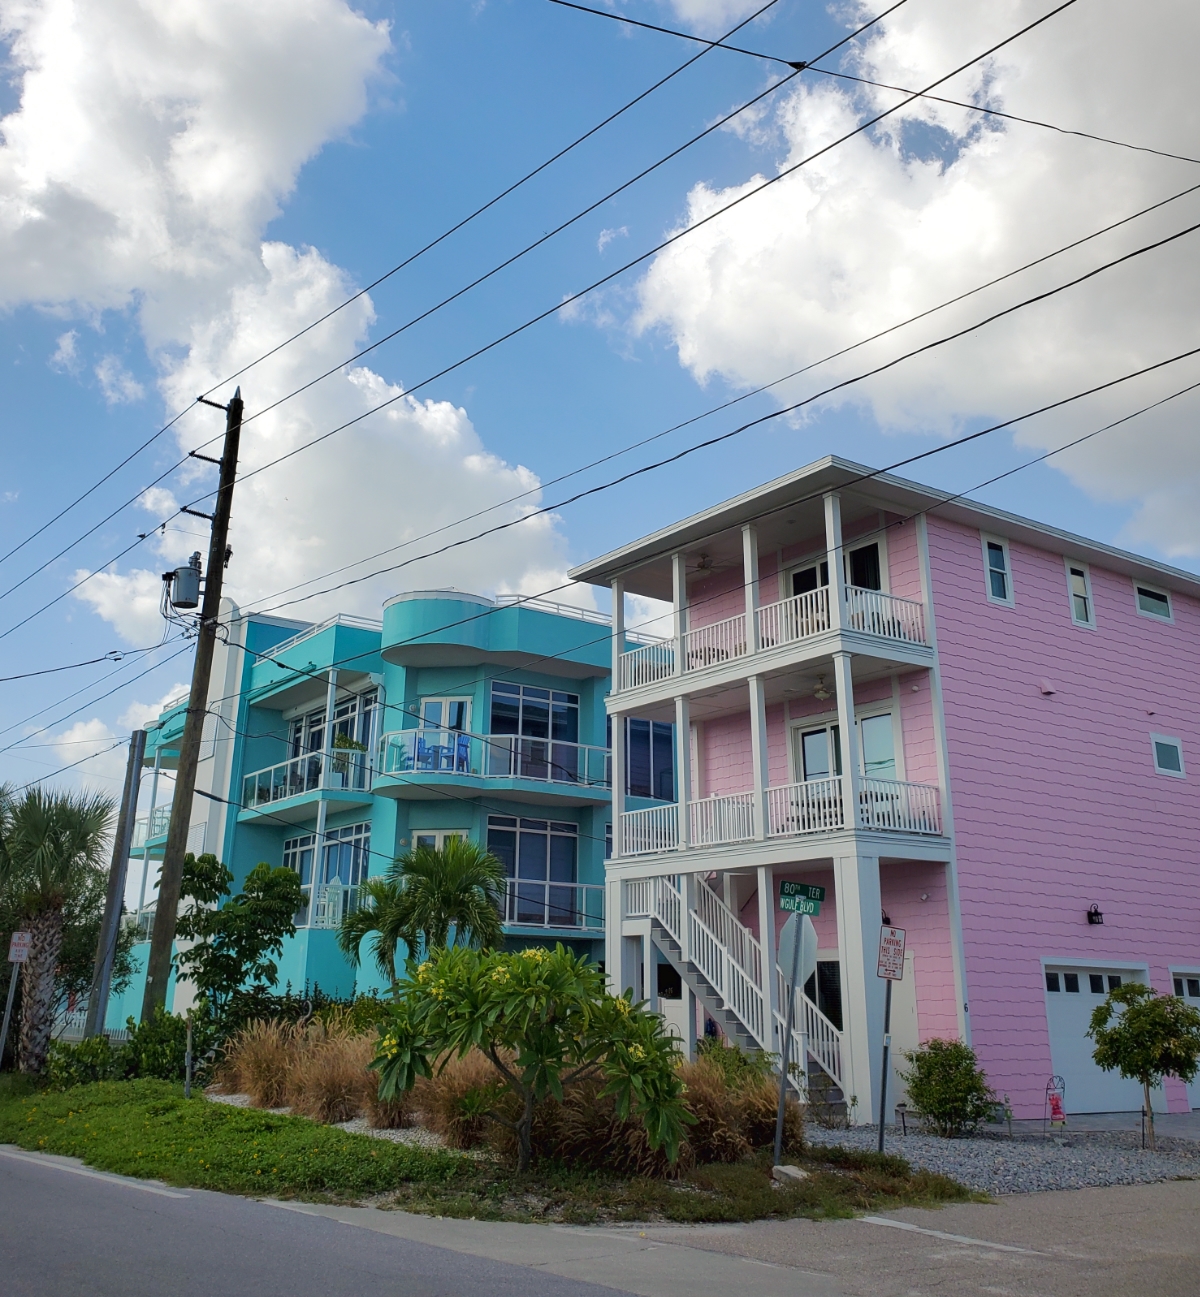 Two contemporary homes side by side in Sunset Beach. One is aqua and one is pink.